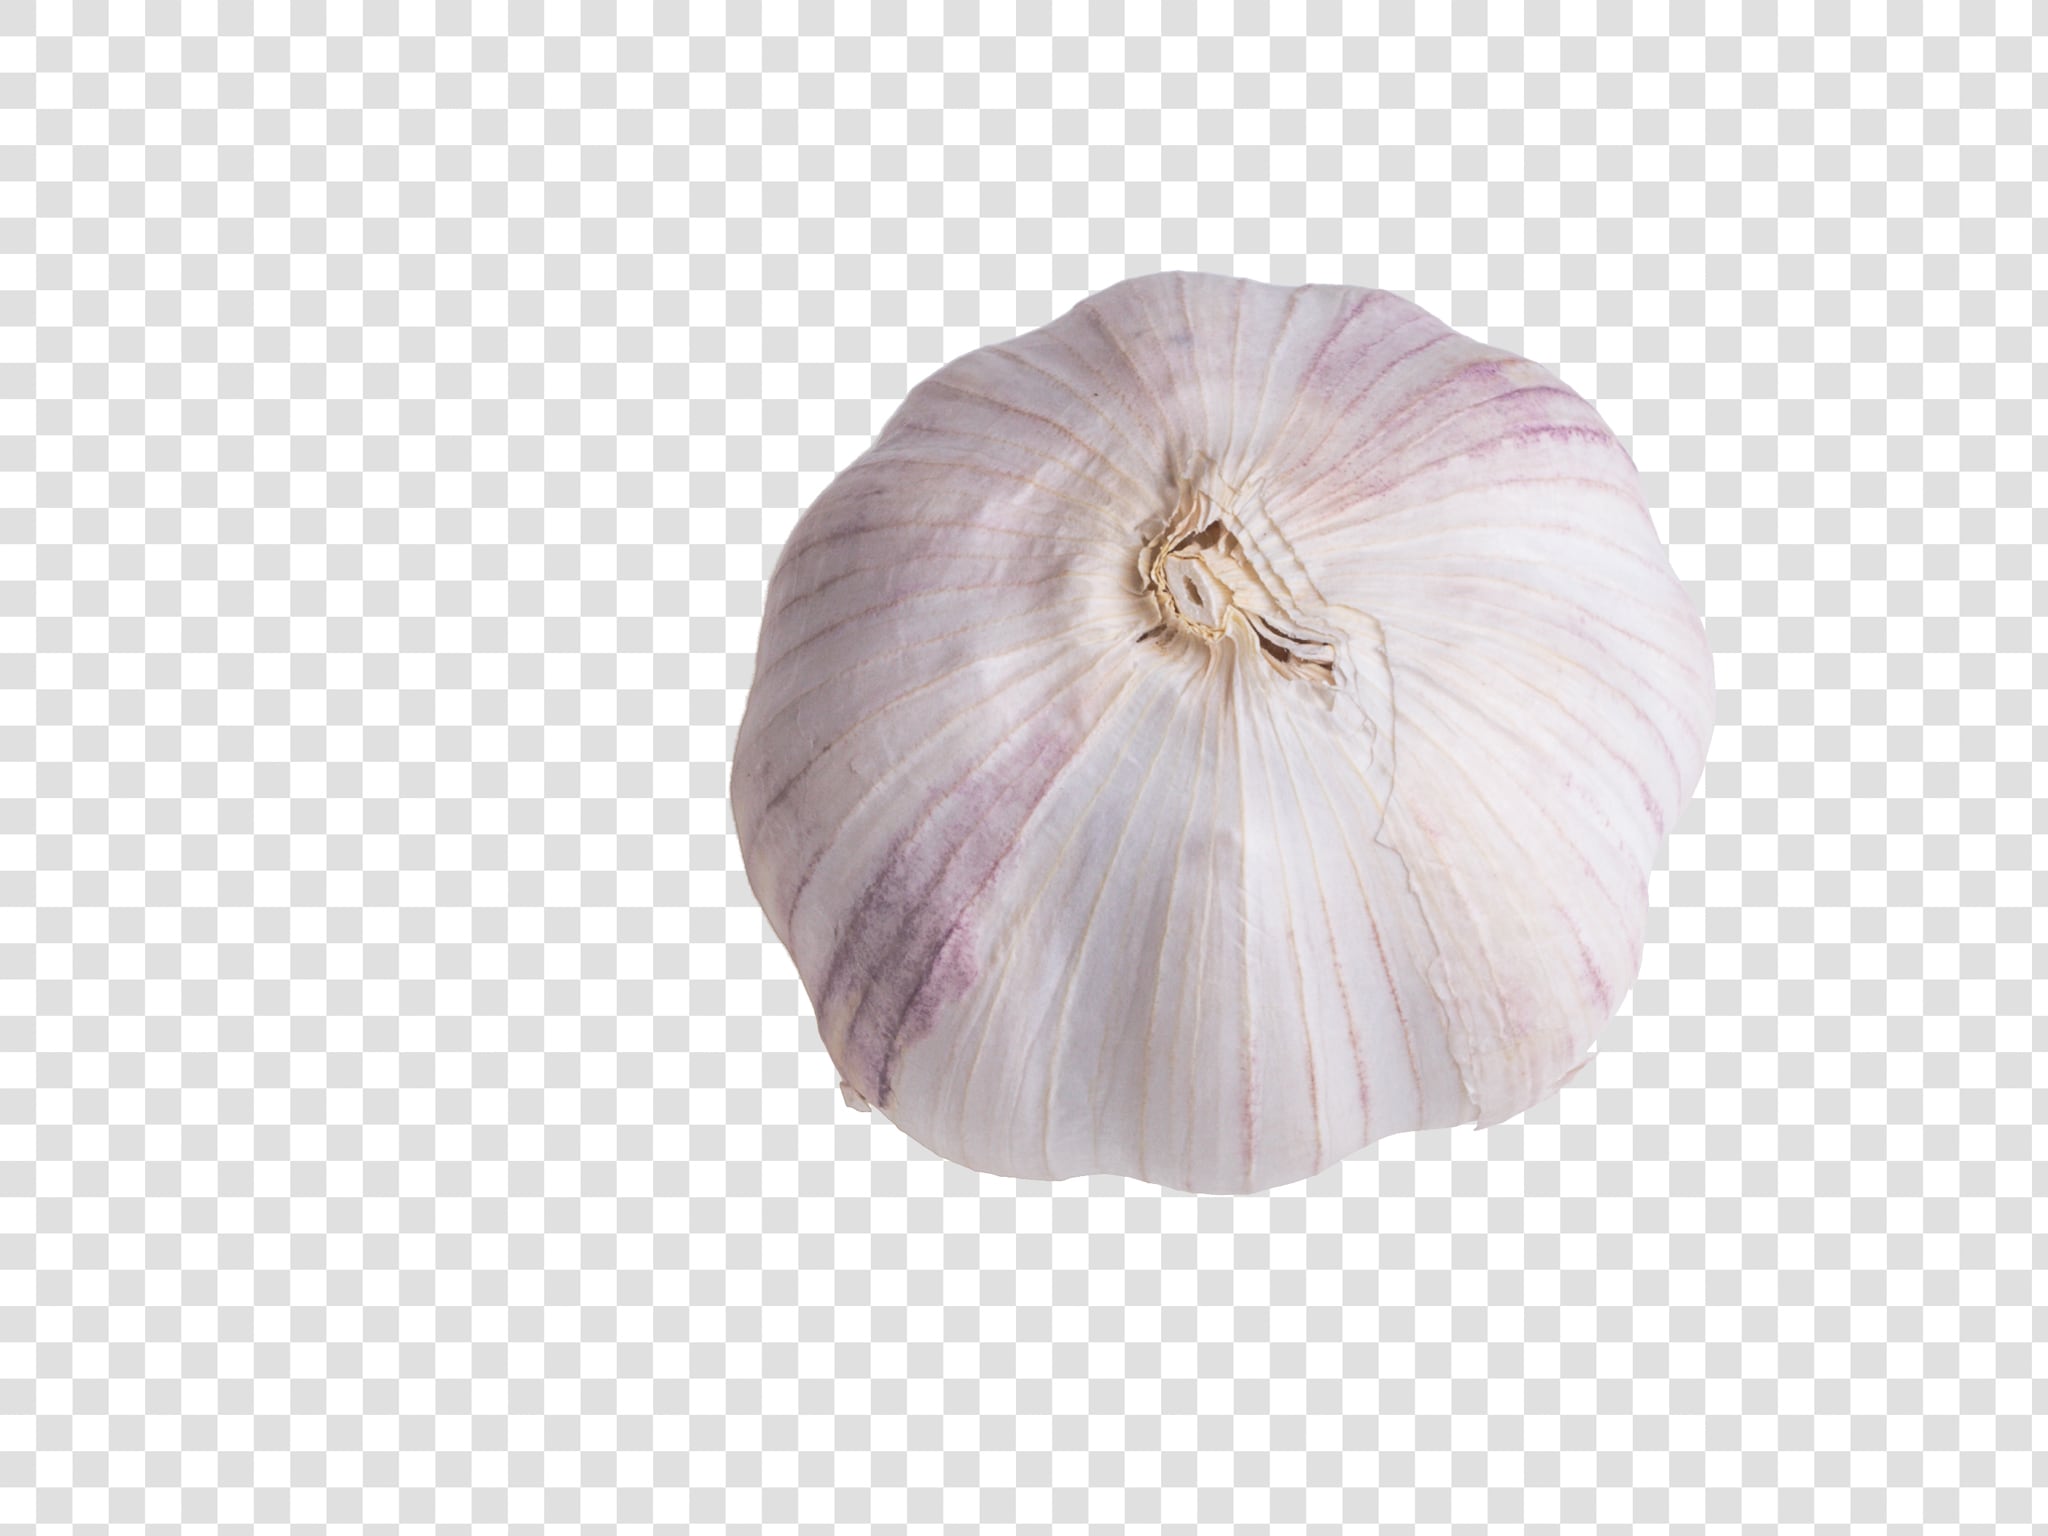 Garlic PSD image with transparent background